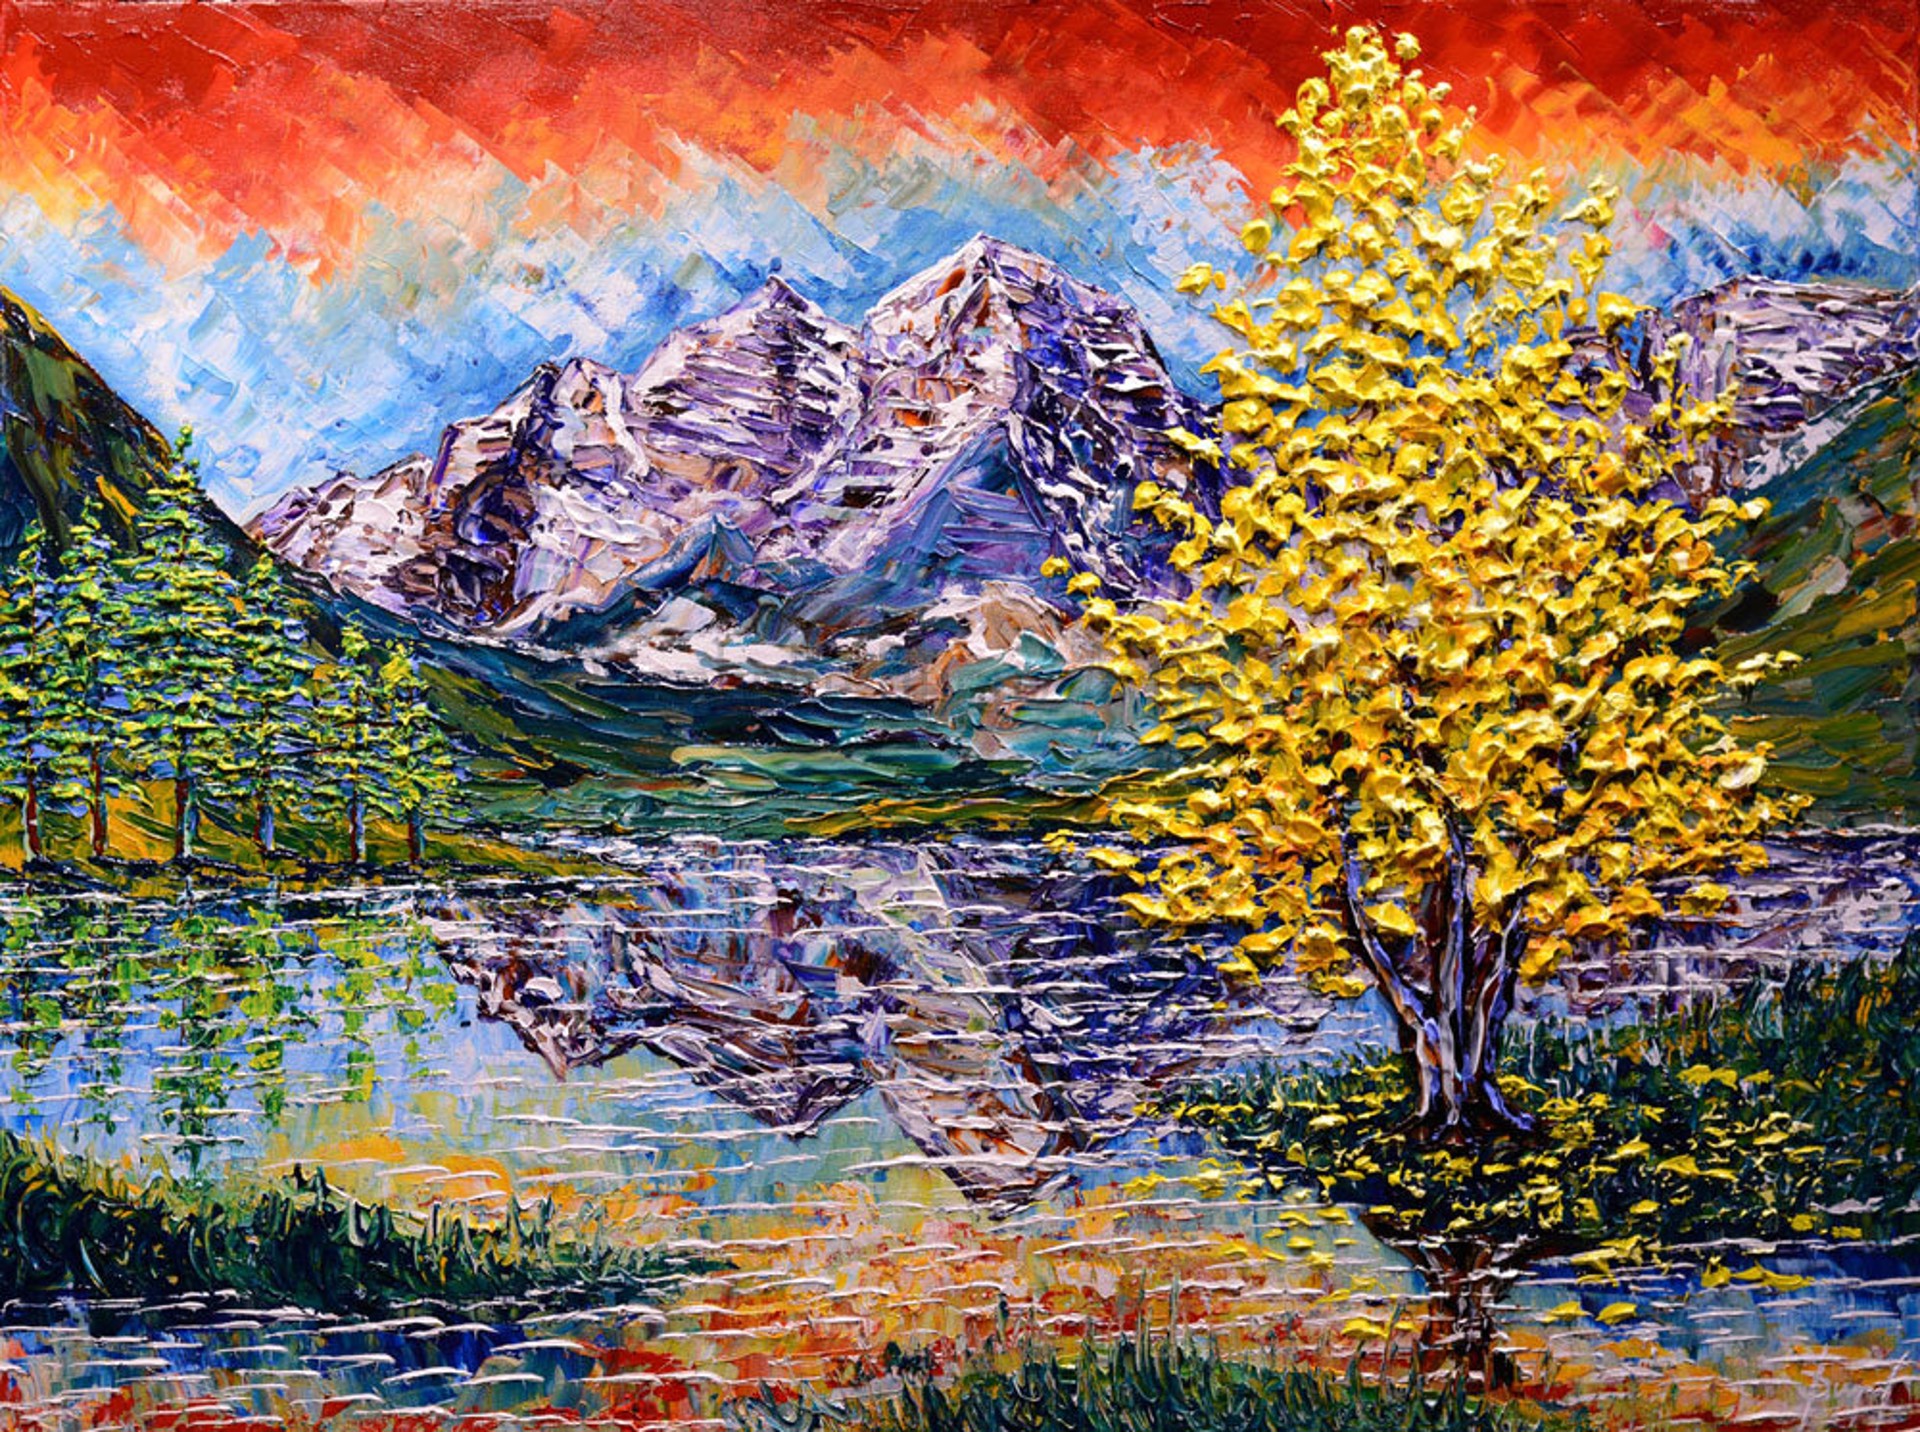 Sunrise of Glorious Mountains 36x48 by Isabelle Dupuy